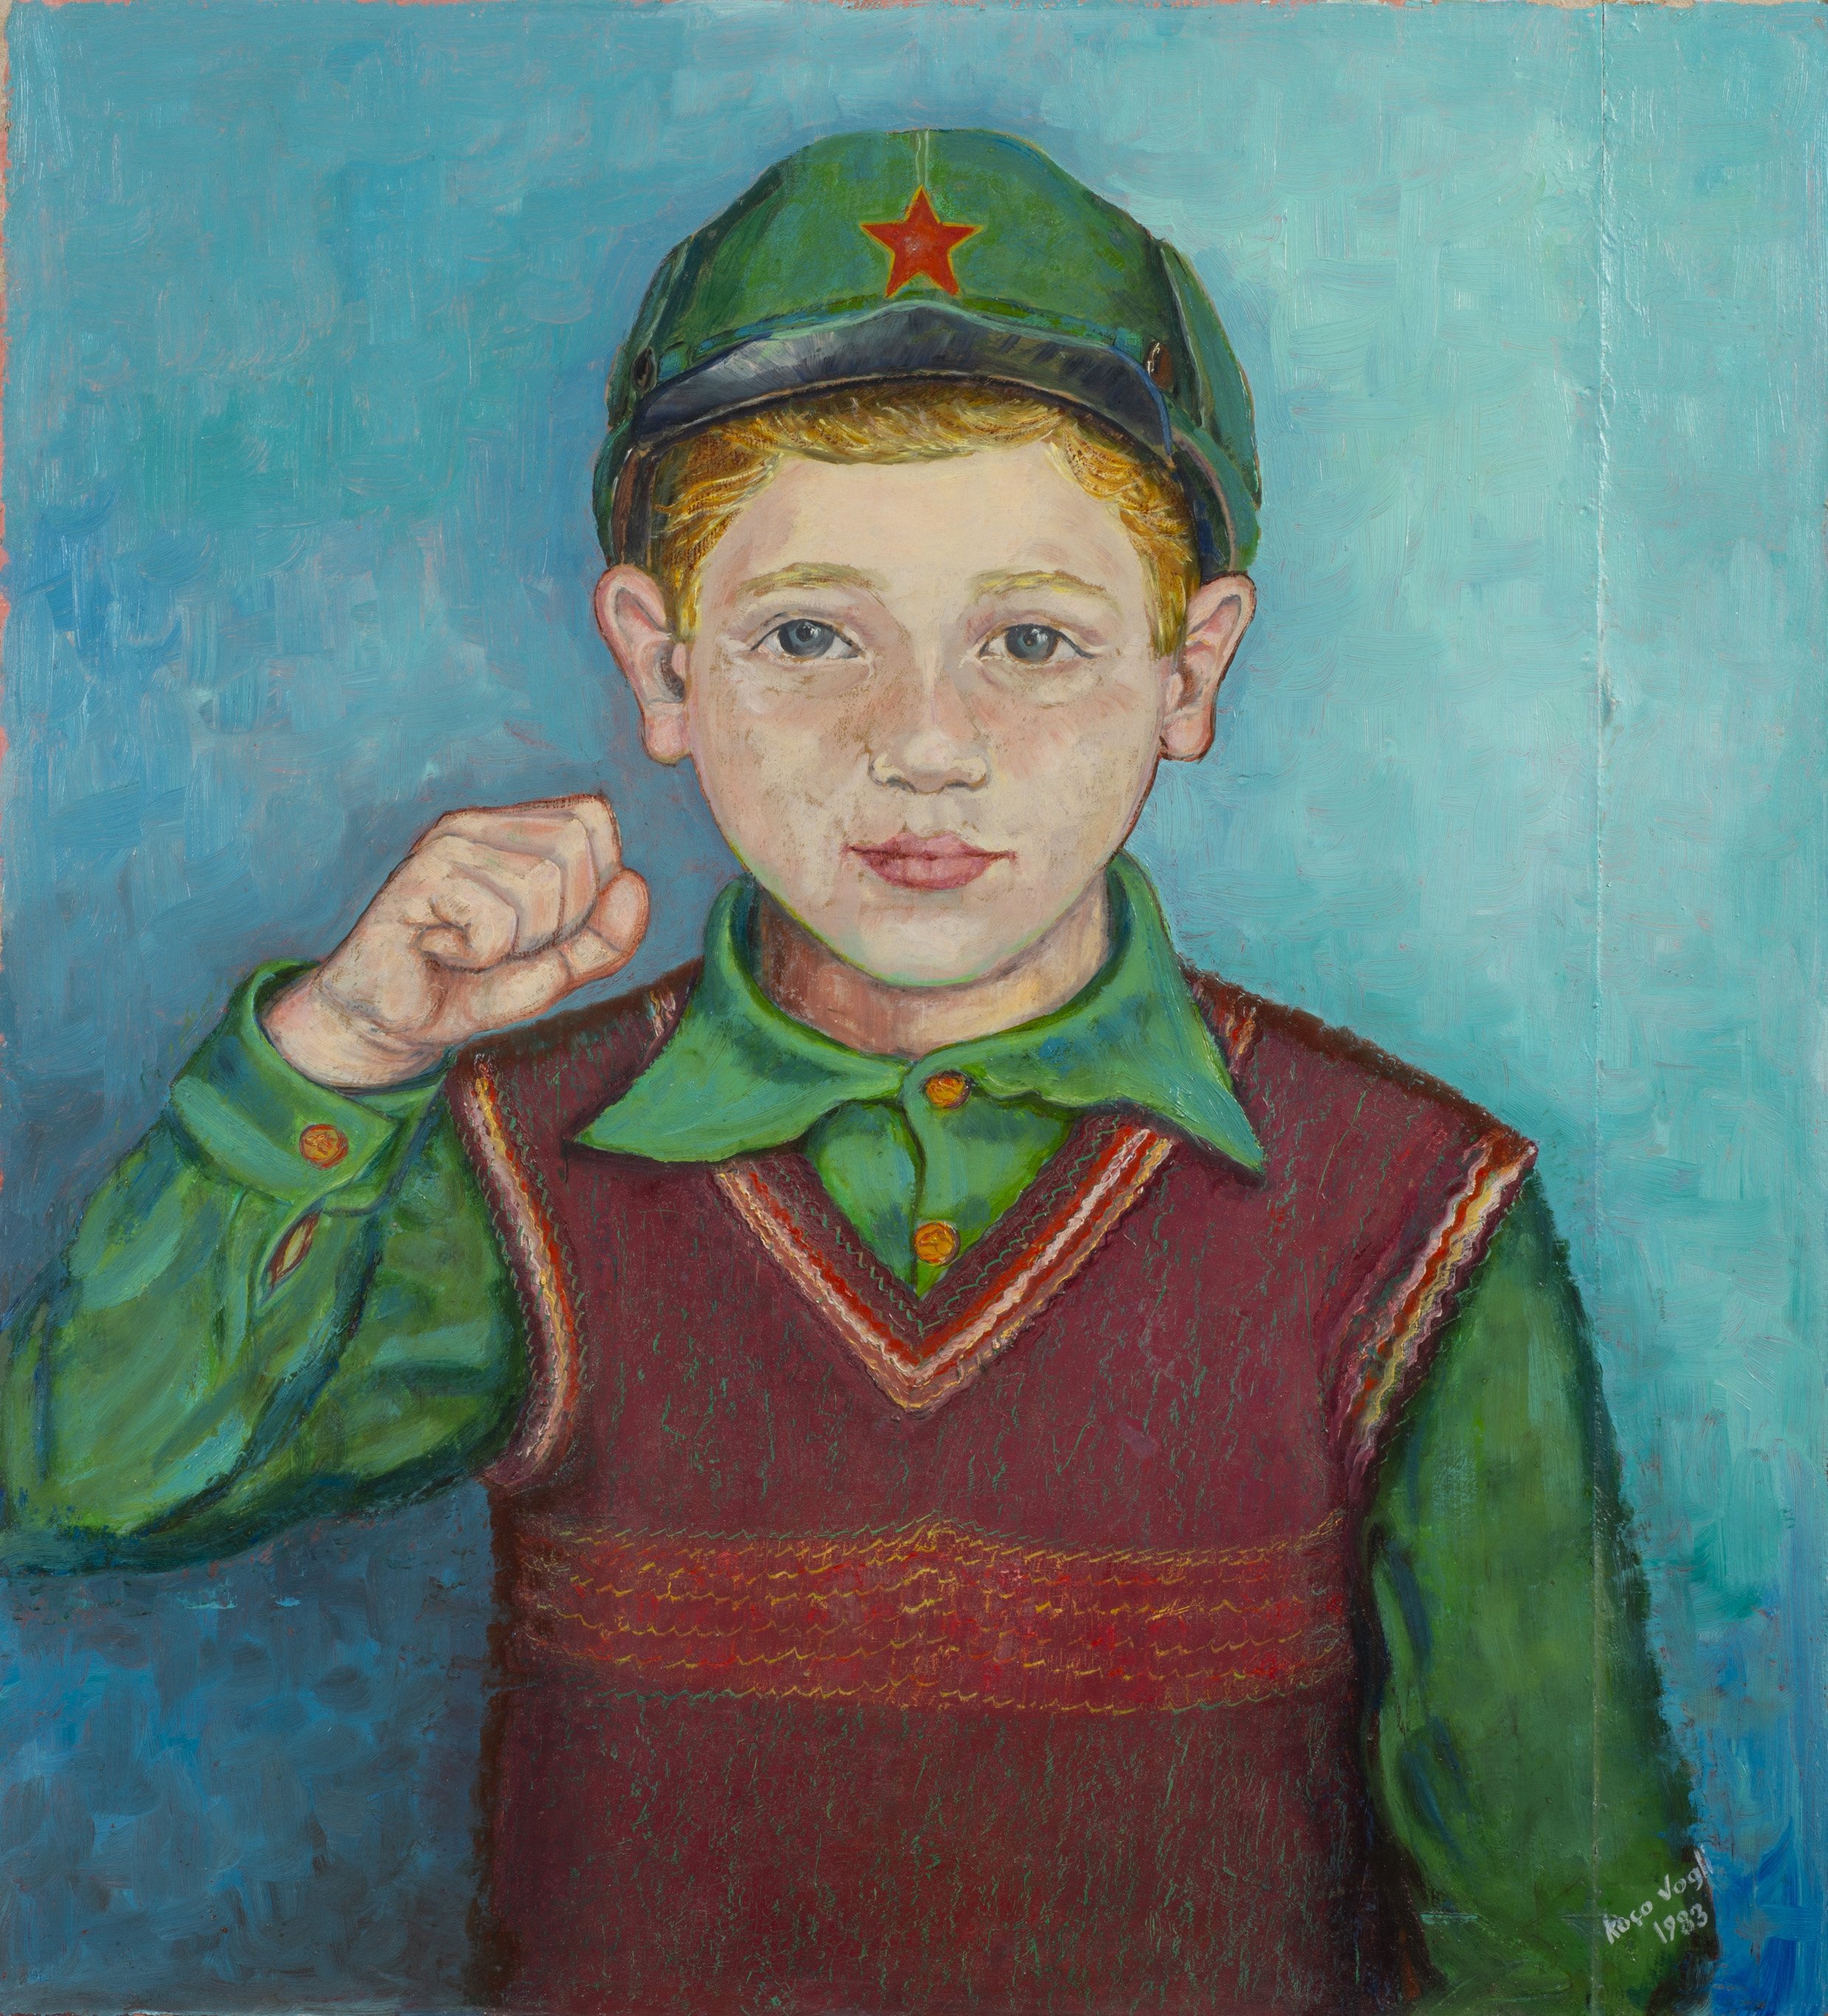 Koço Vogli, 'I Am a Soldier,' 1983, oil on cardboard, 52 by 48 centimeters. (Courtesy of Pera Museum)